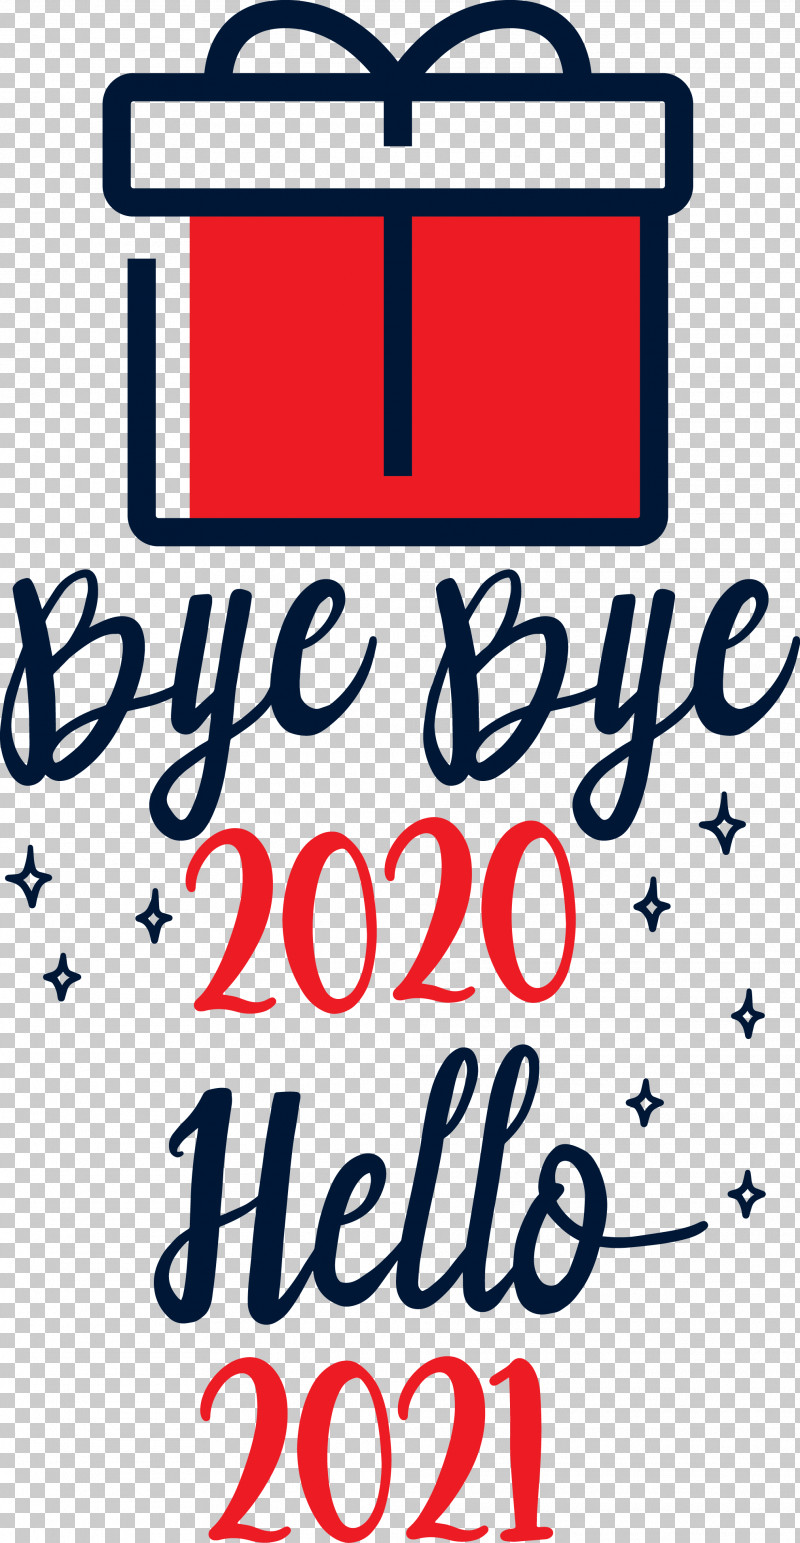 Hello 2021 Year Bye Bye 2020 Year PNG, Clipart, 2019, Abstract Art, Animation, Bye Bye 2020 Year, Christmas Day Free PNG Download